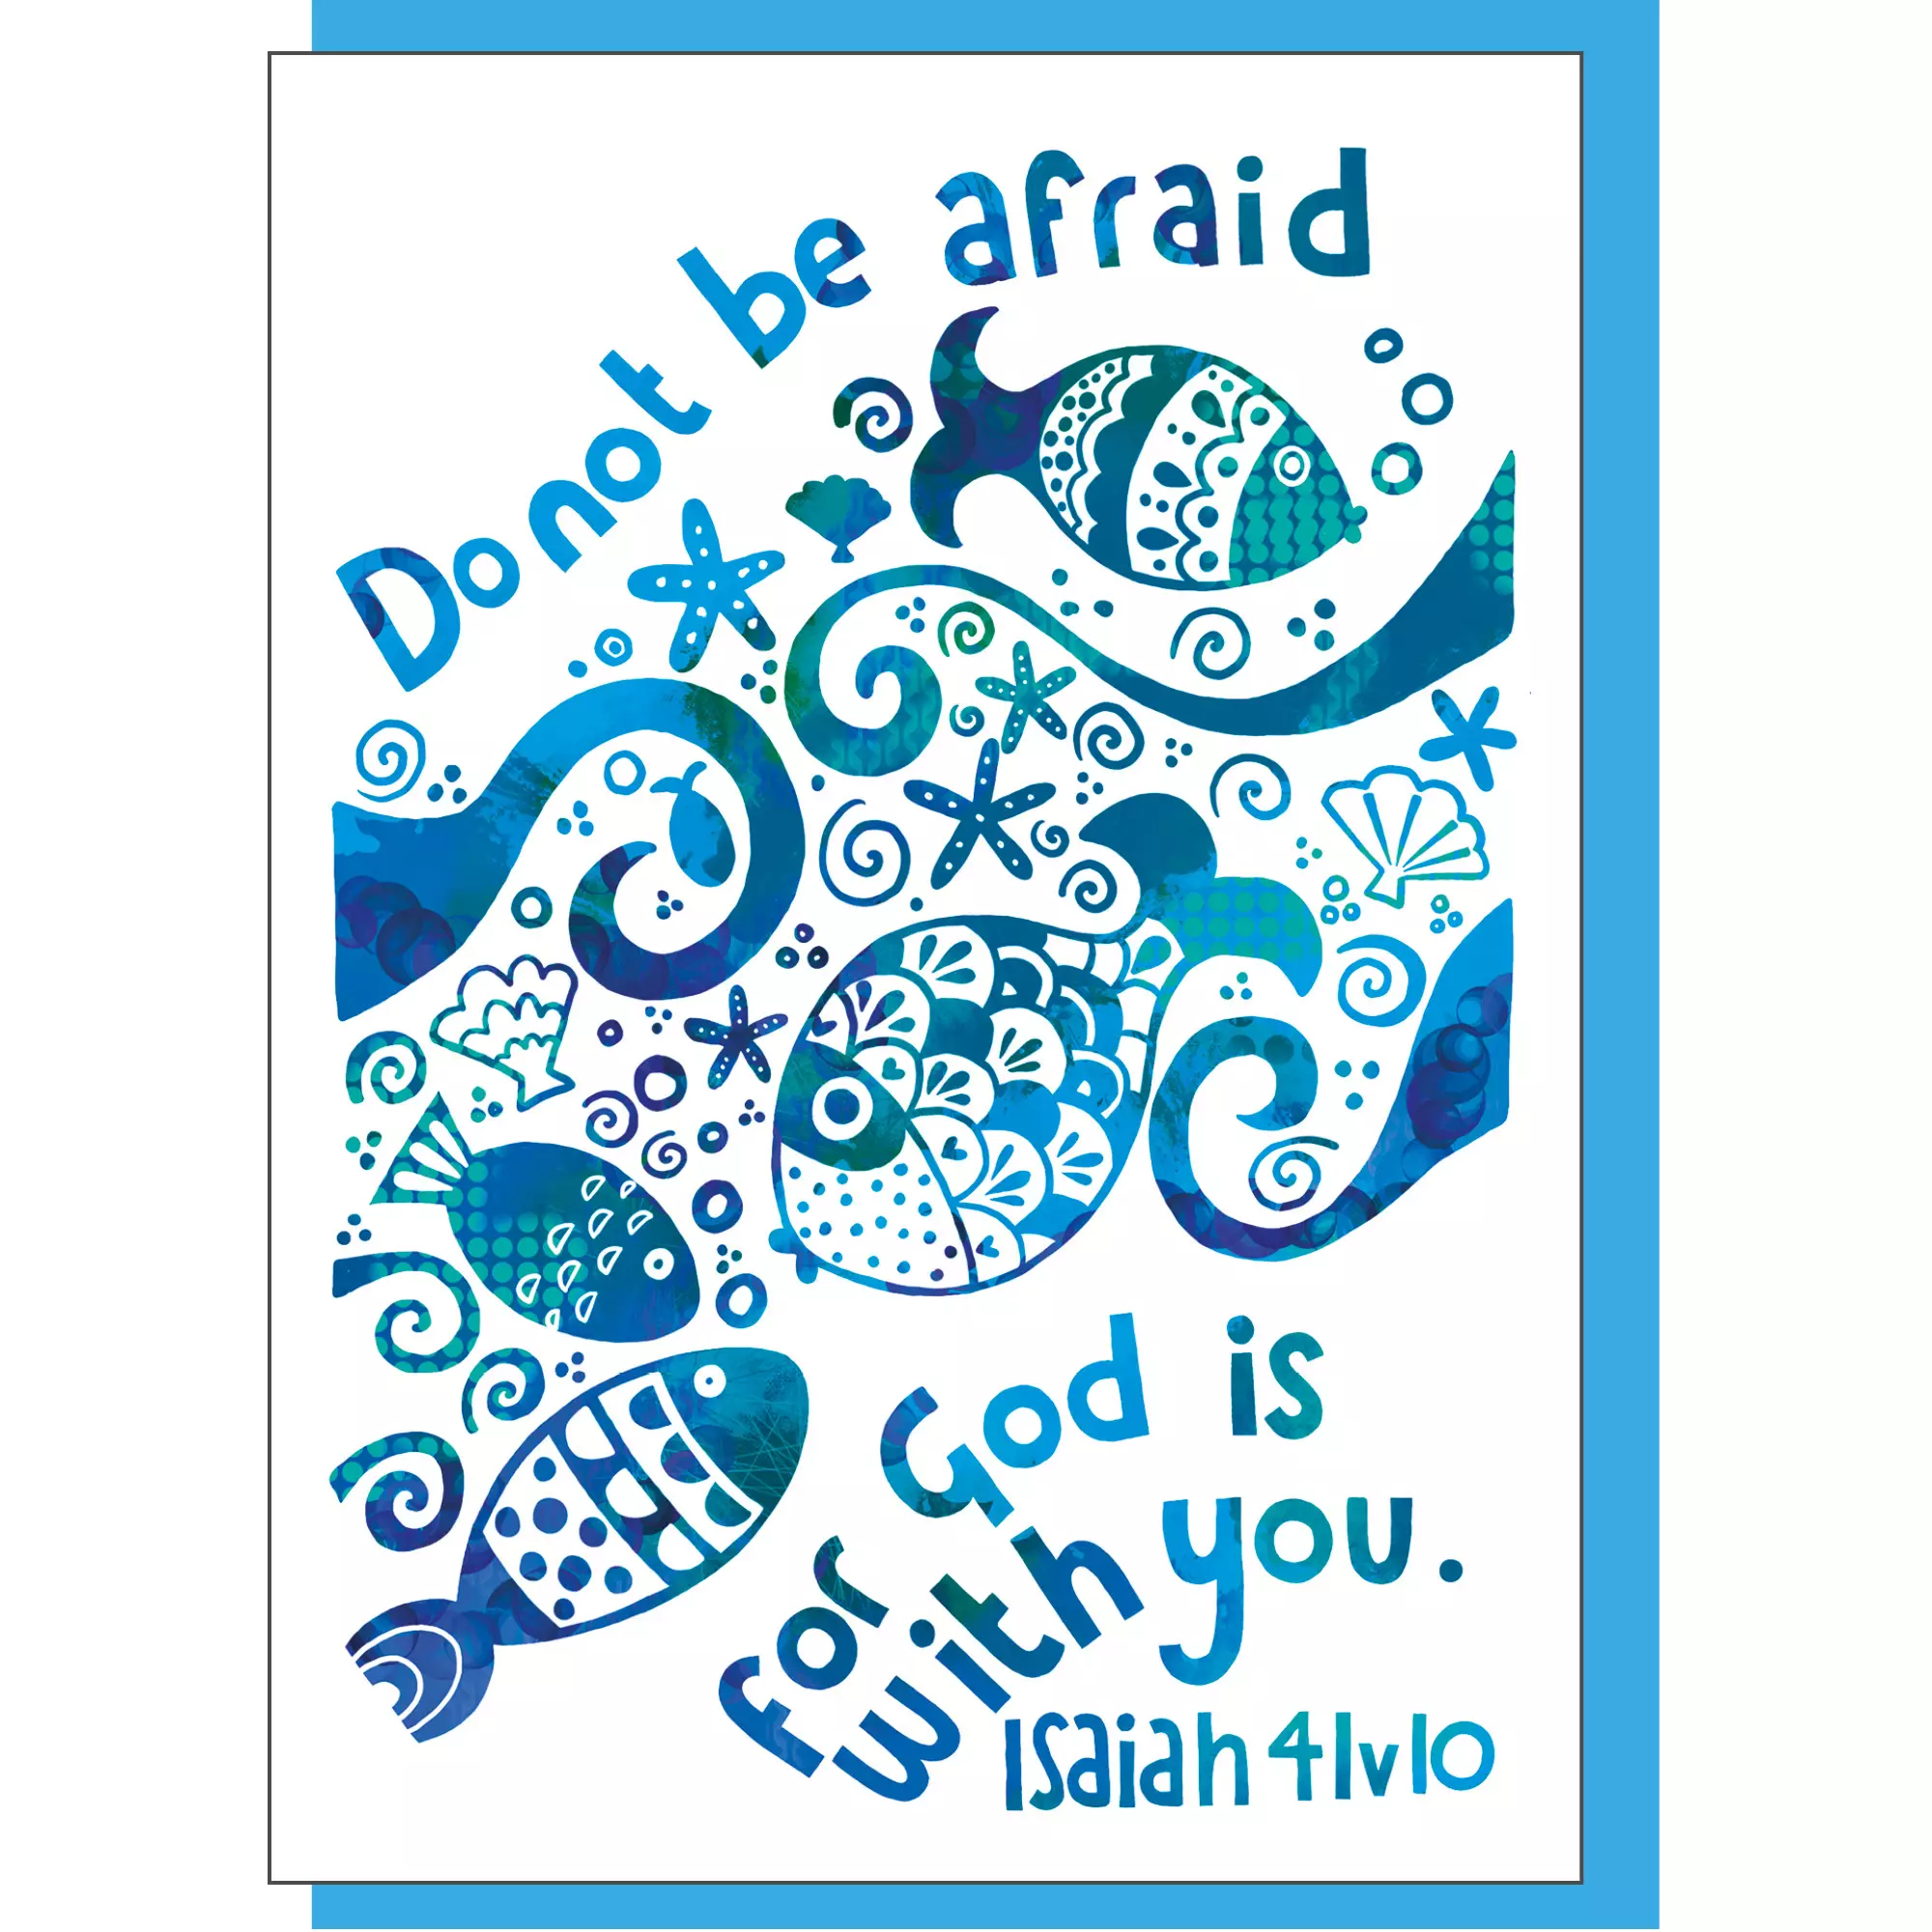 Do not be afraid Greetings Card